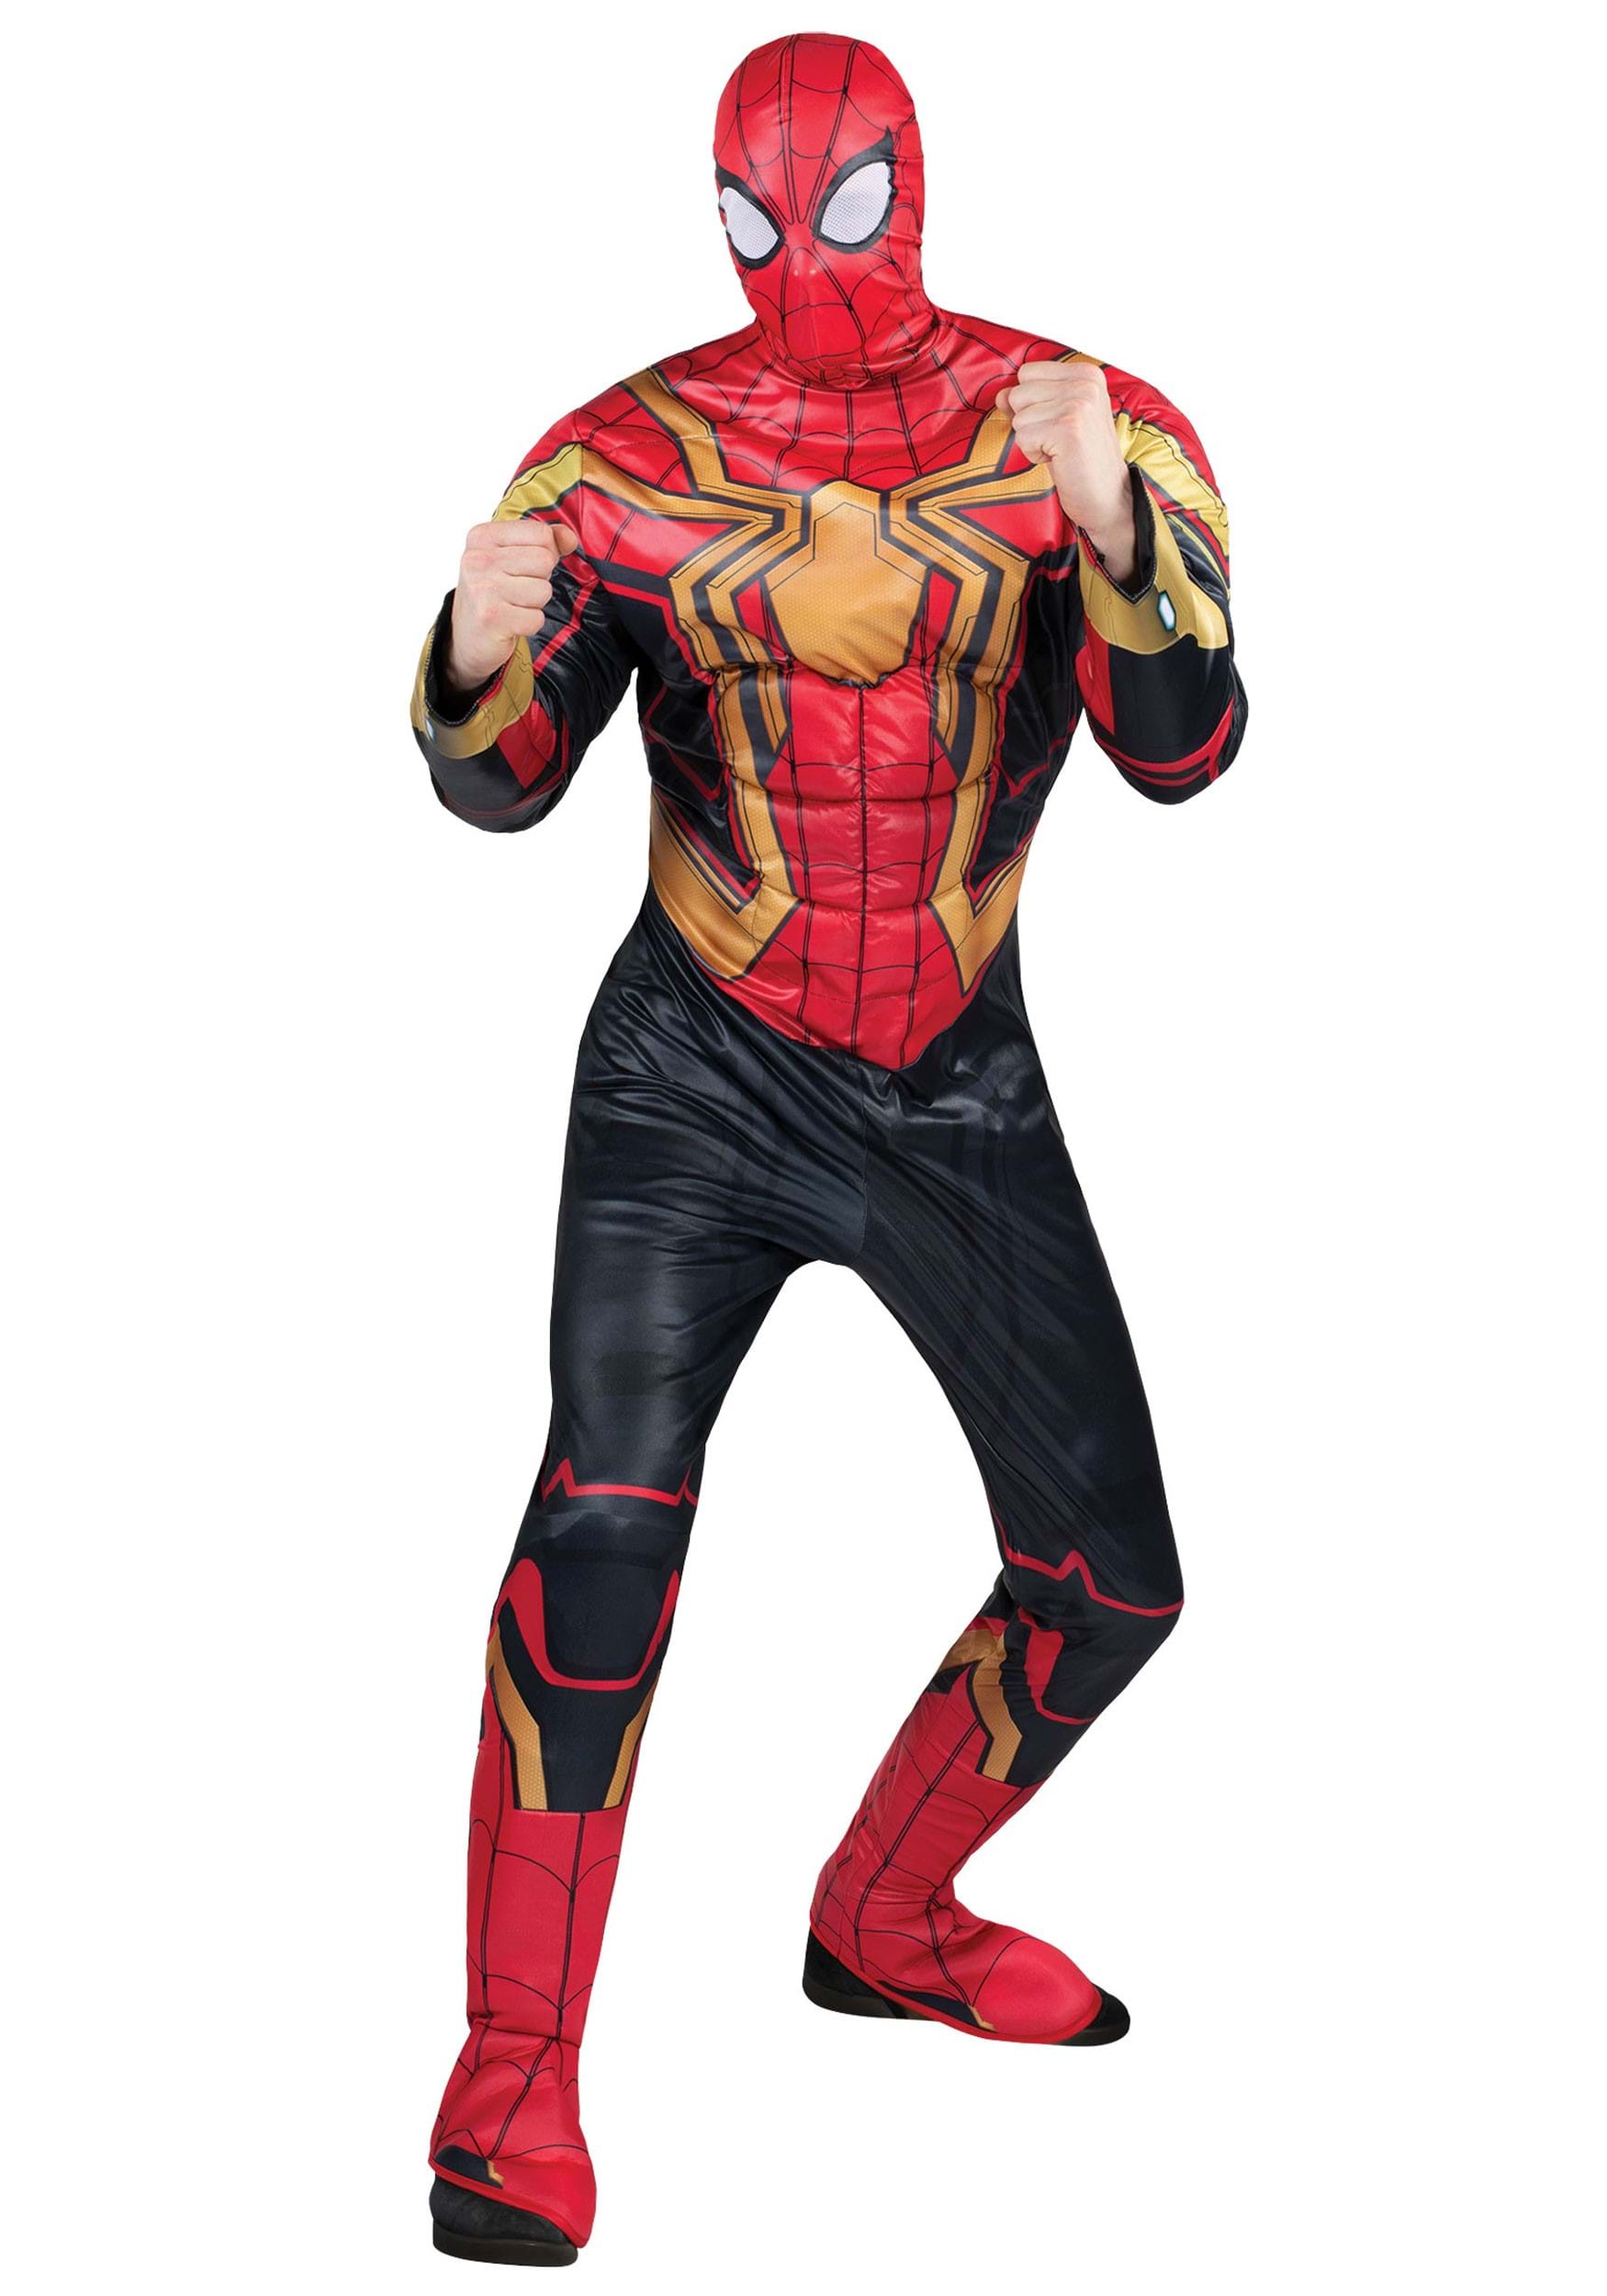 Image of Integrated Suit Spider-Man Adult Costume | Marvel Costumes ID JWC0923-L